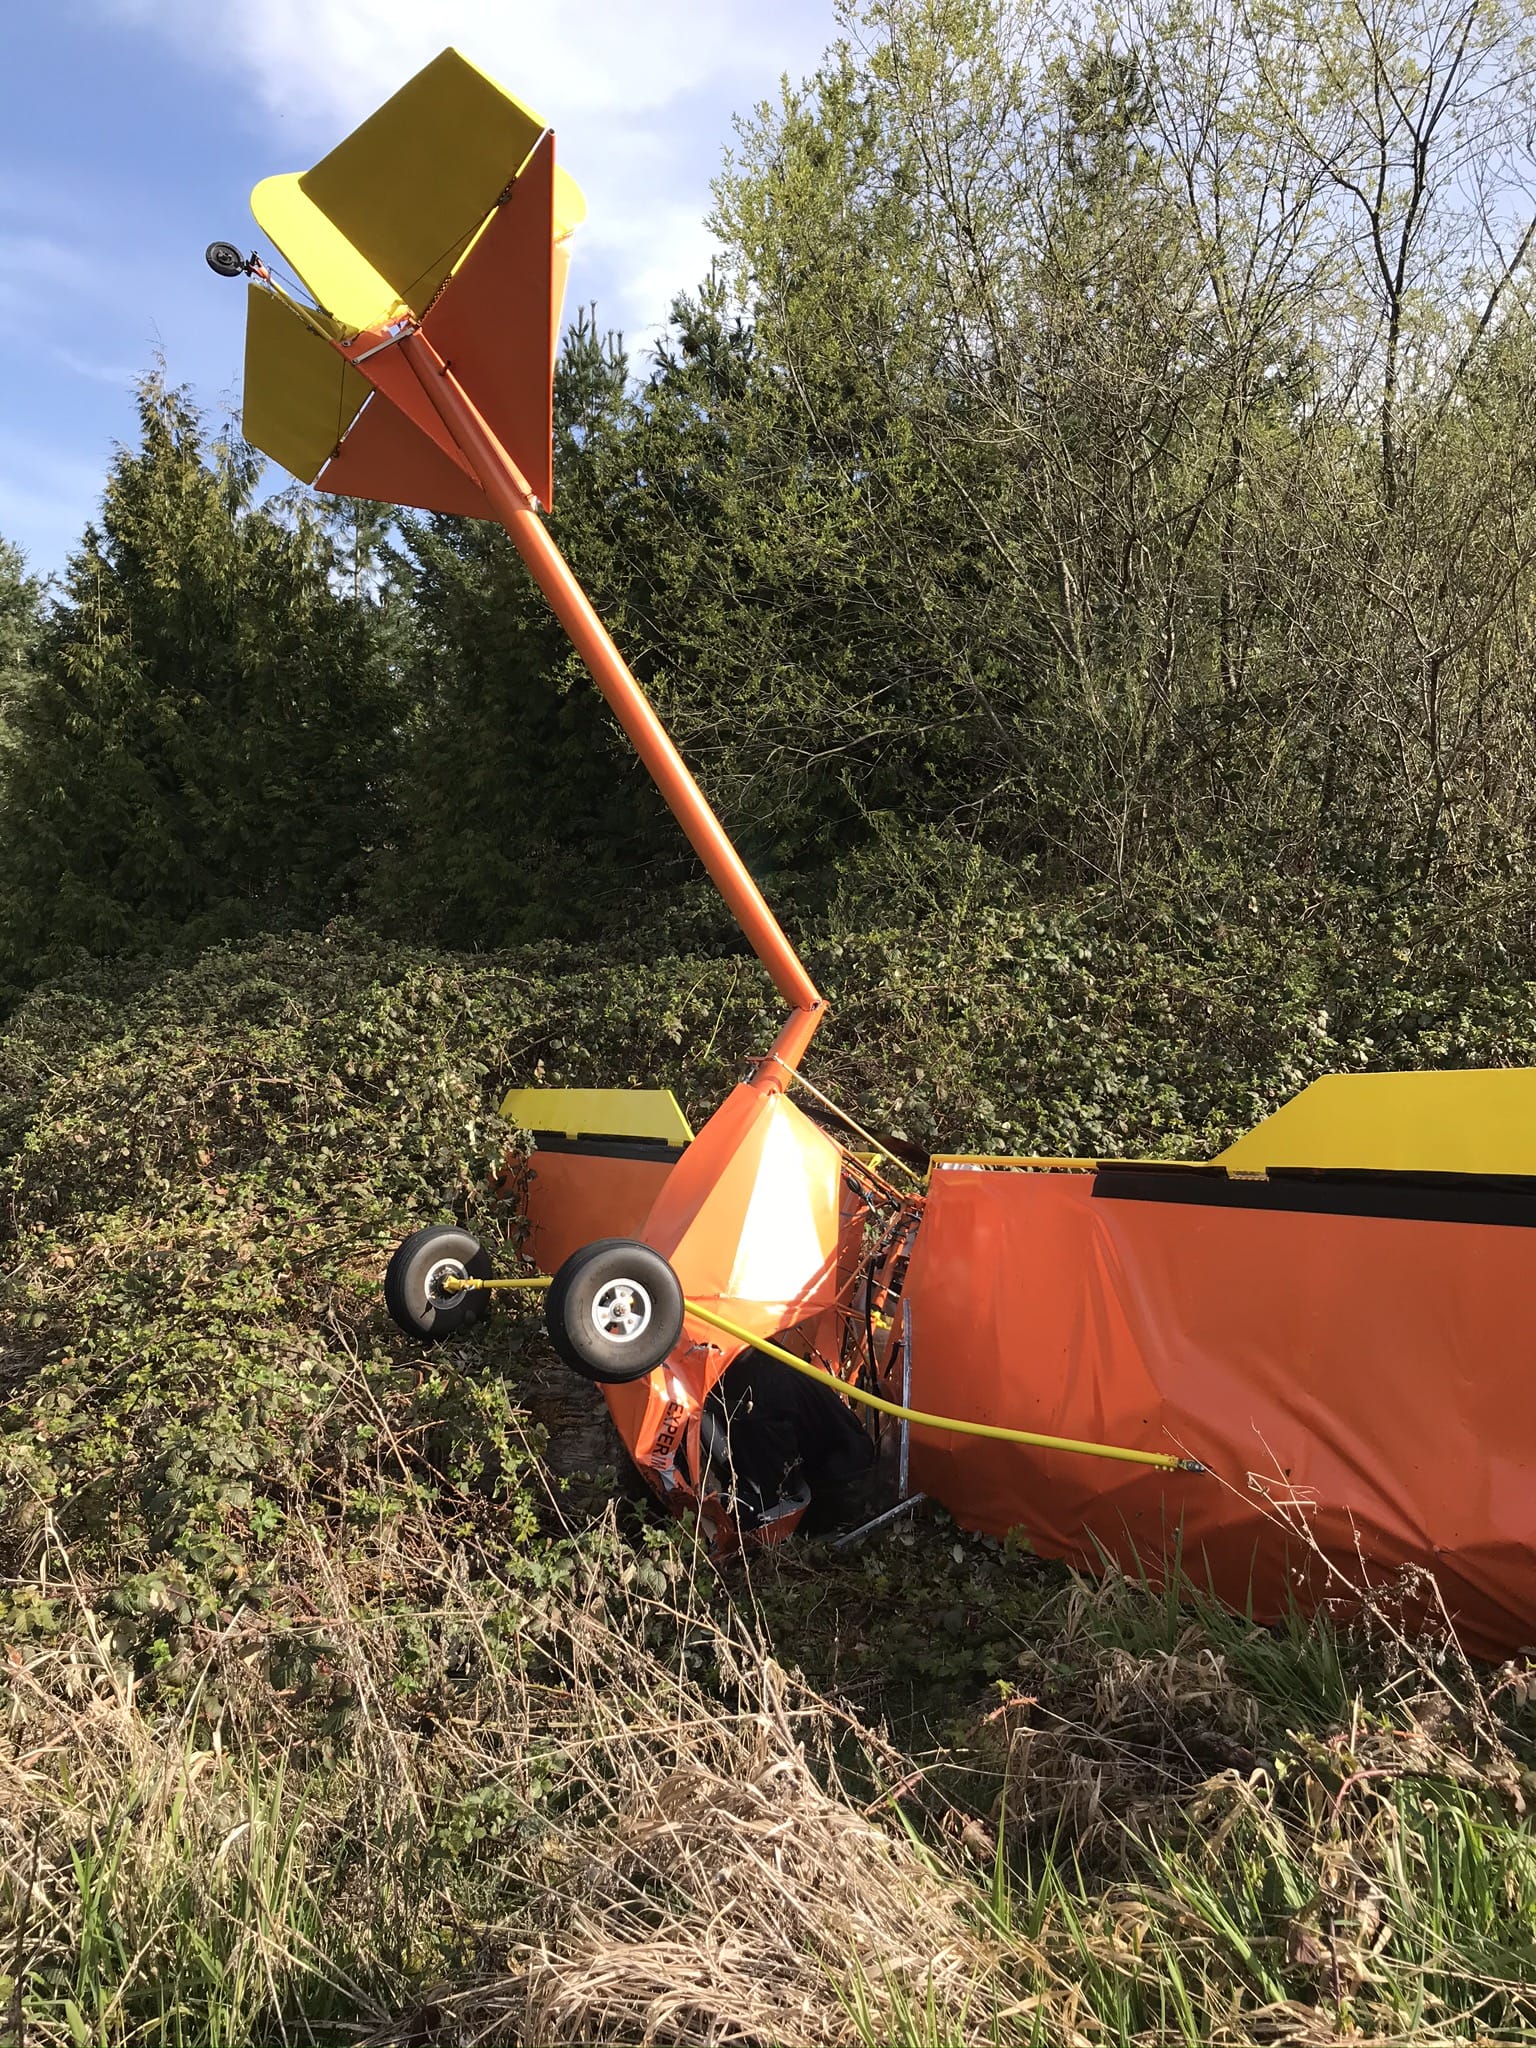 A pilot was killed Monday morning when his ultralight aircraft crashed near a private airstrip in north Clark County.